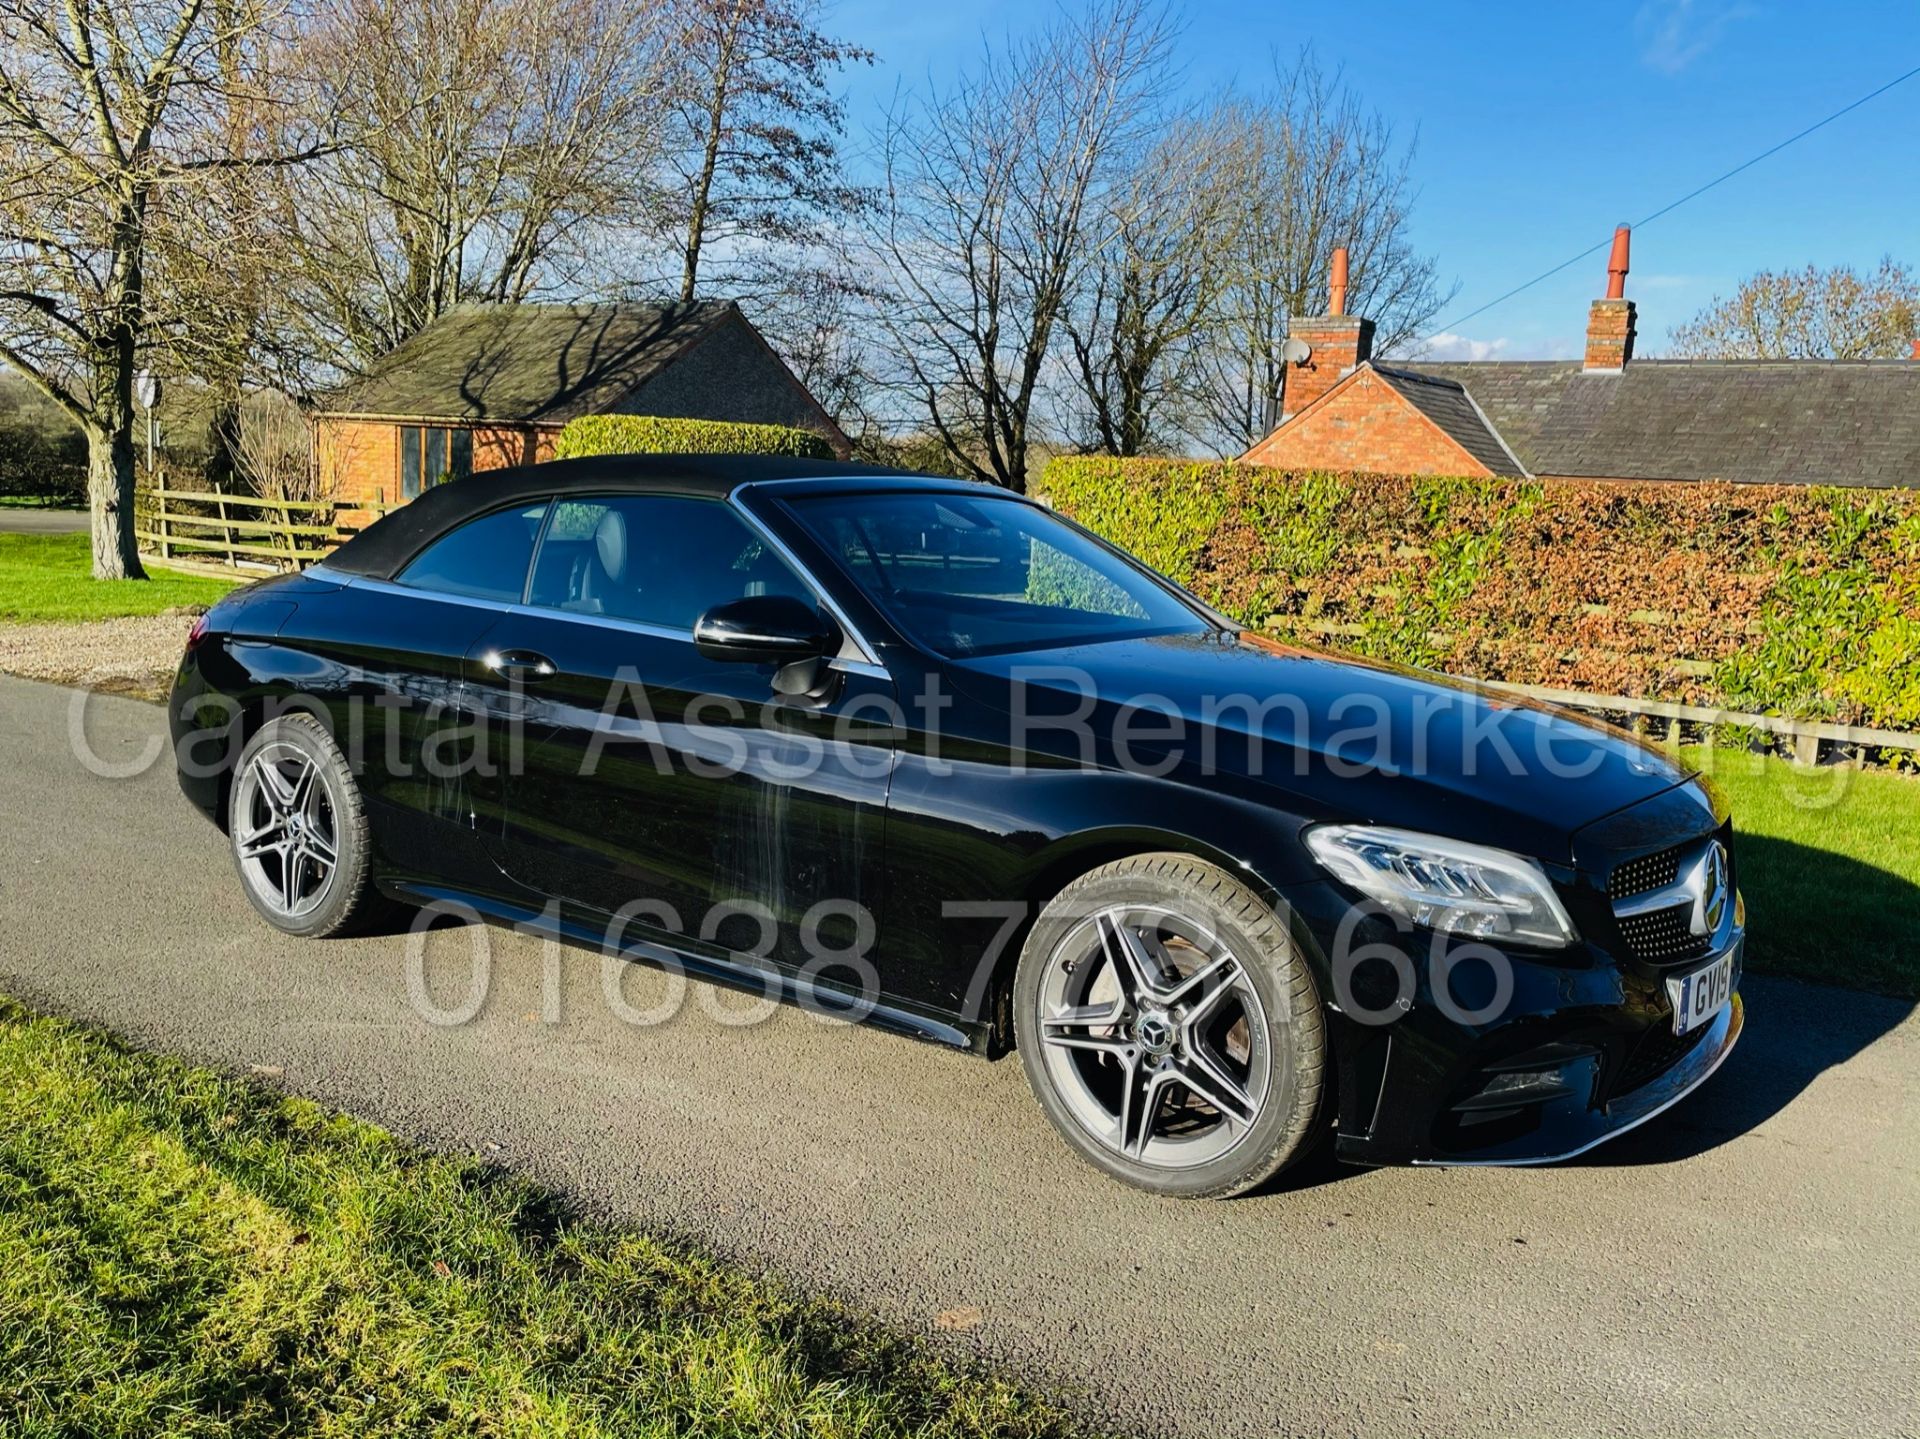 ON SALE MERCEDES-BENZ C220D *AMG LINE - CABRIOLET* (2019) '9G TRONIC AUTO - LEATHER - SAT NAV' - Image 24 of 59